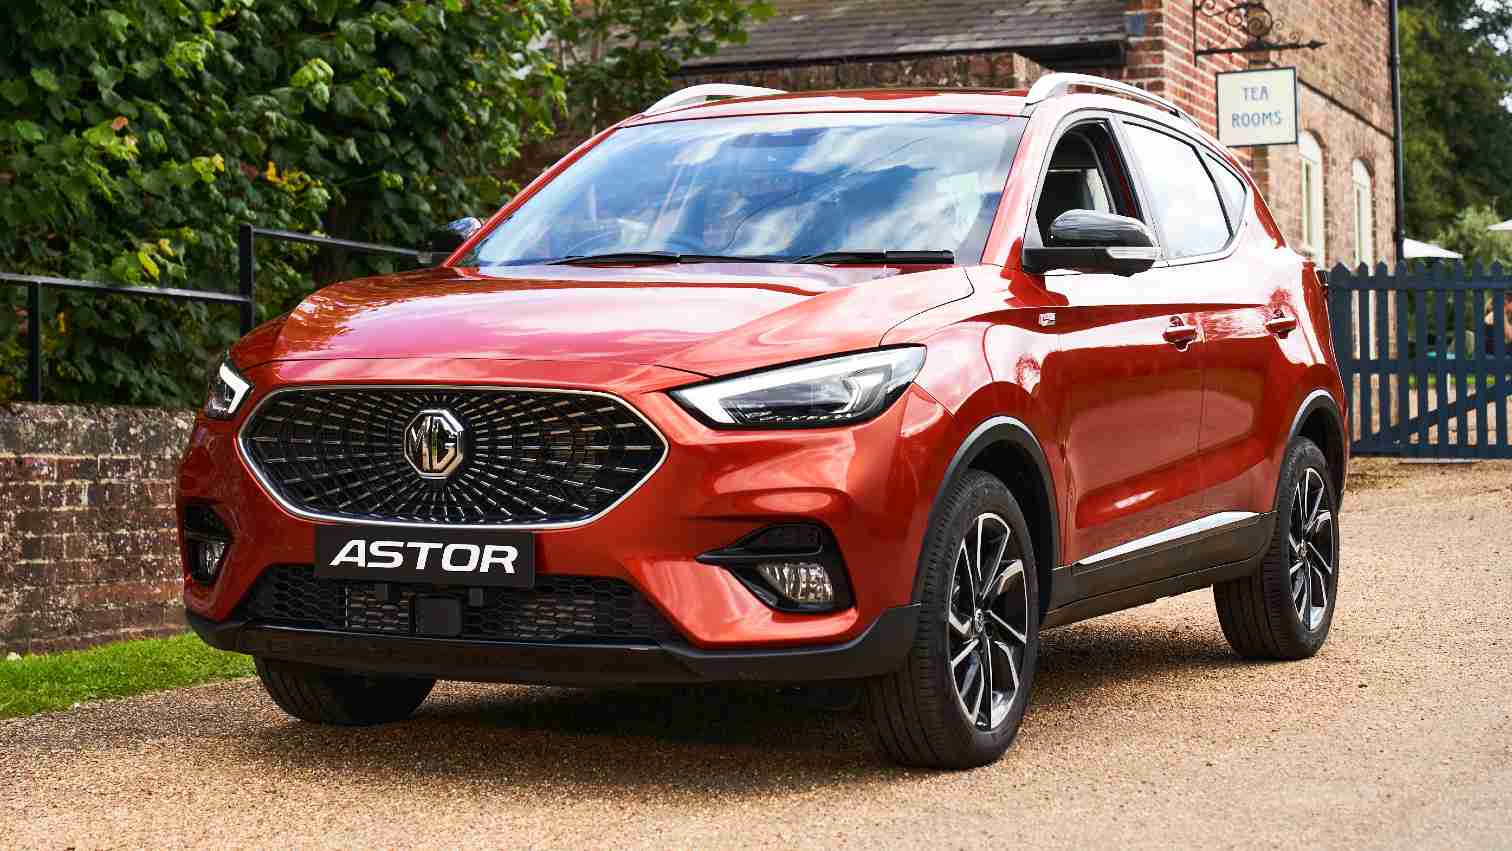 MG Astor makes India debut: Midsize SUV to be offered with two petrol engine options, Level 2 ADAS- Technology News, Firstpost